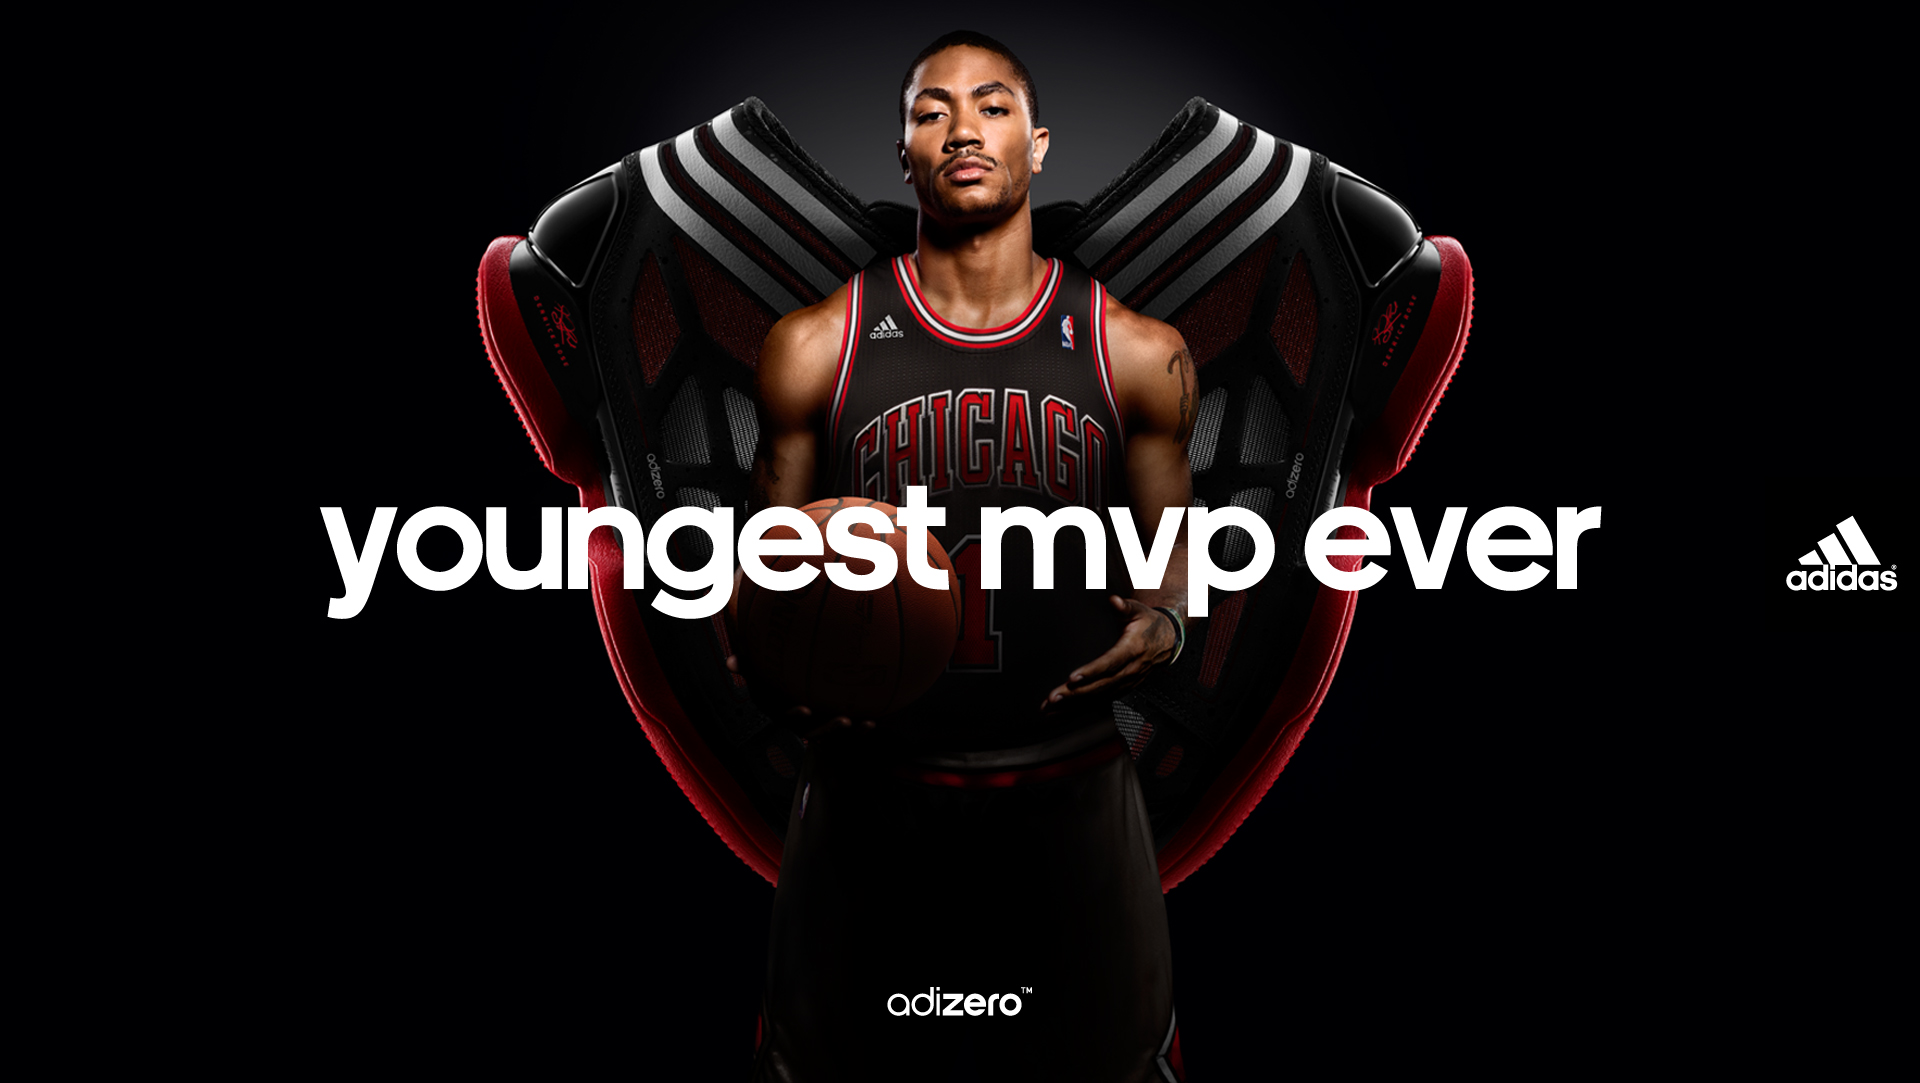 Check out the wallpaper from adidas Basketball featuring Rose and the